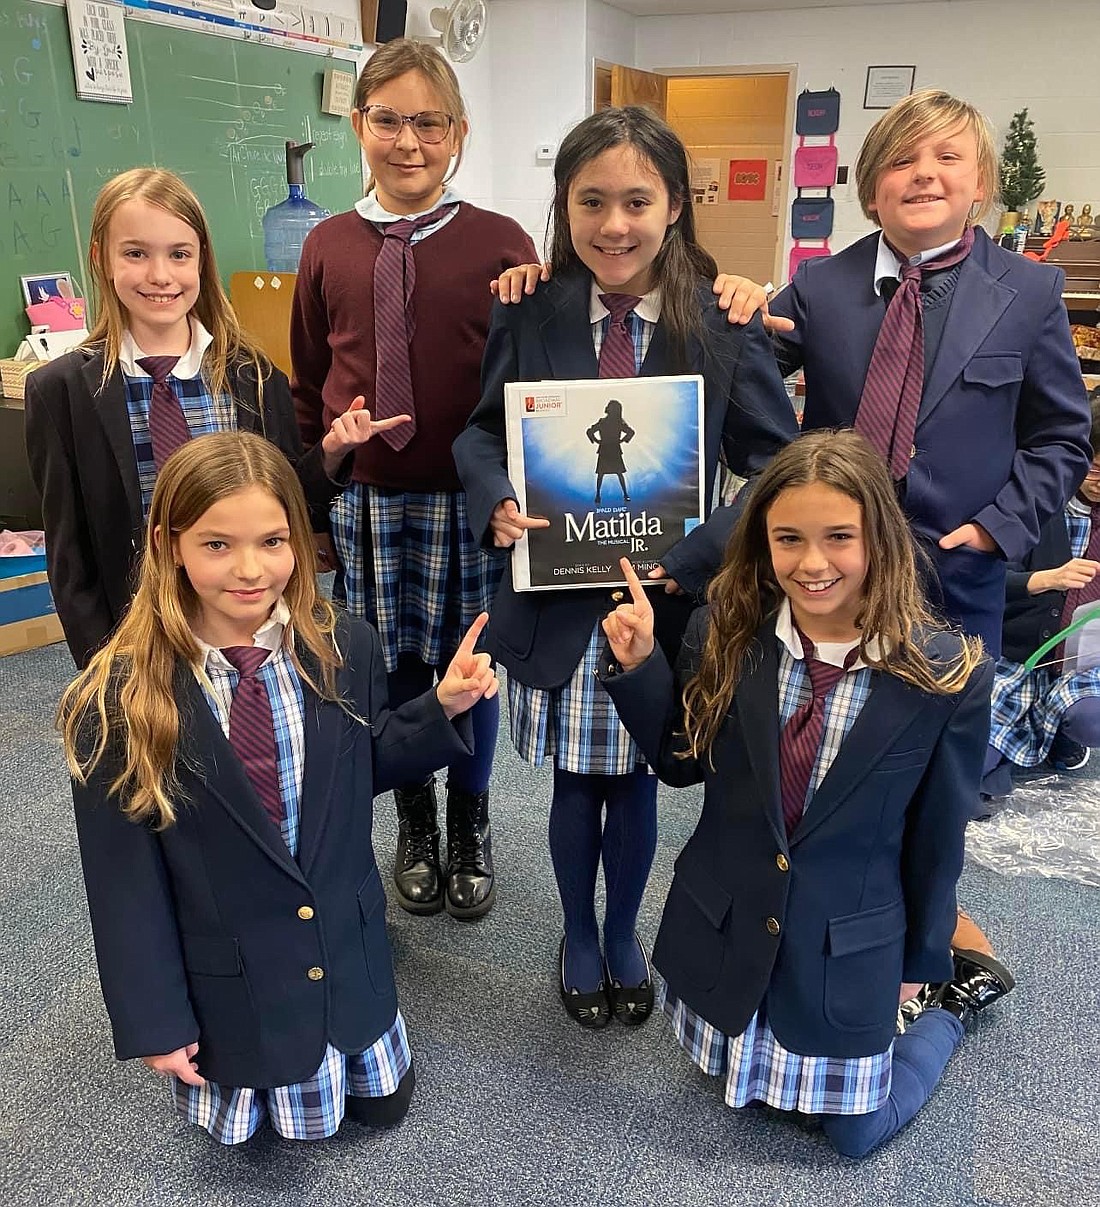 ST. MARY’S INSTITUTE choir members who performed in “Matilda Jr.” at SMI last May, proudly hold up a poster from their time in the drama club’s play. (Photo provided)